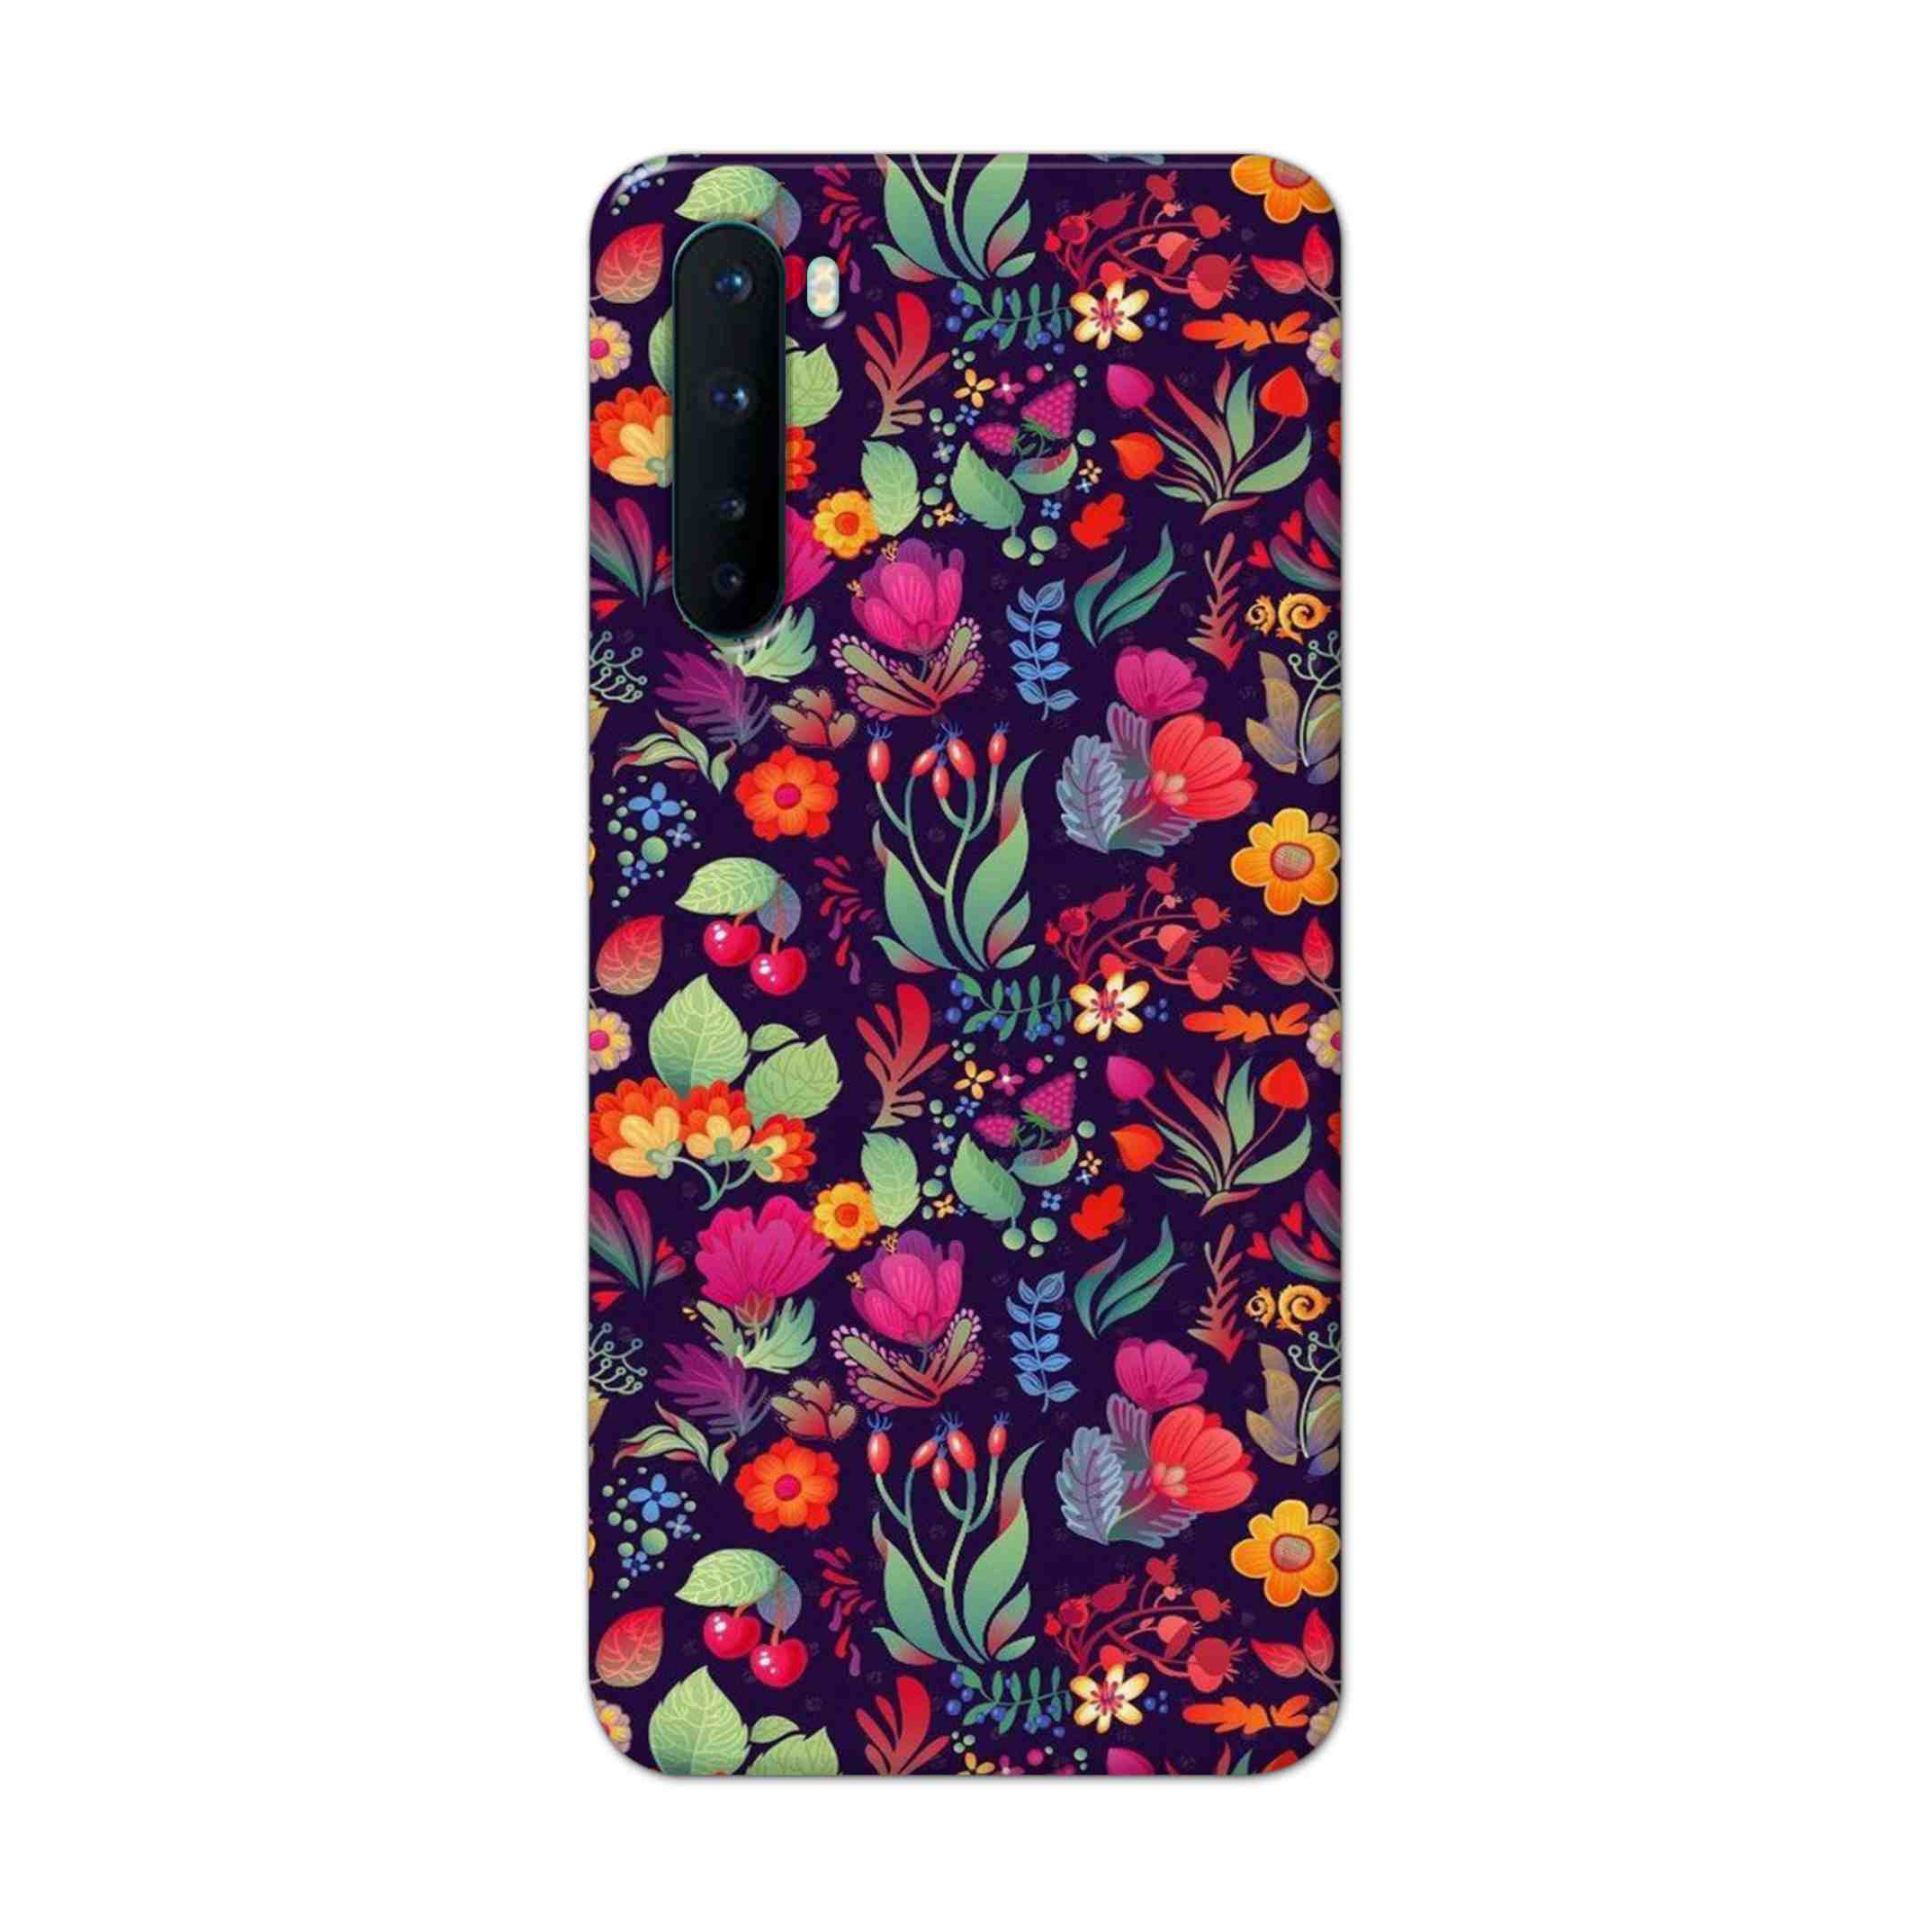 Buy Fruits Flower Hard Back Mobile Phone Case Cover For OnePlus Nord Online